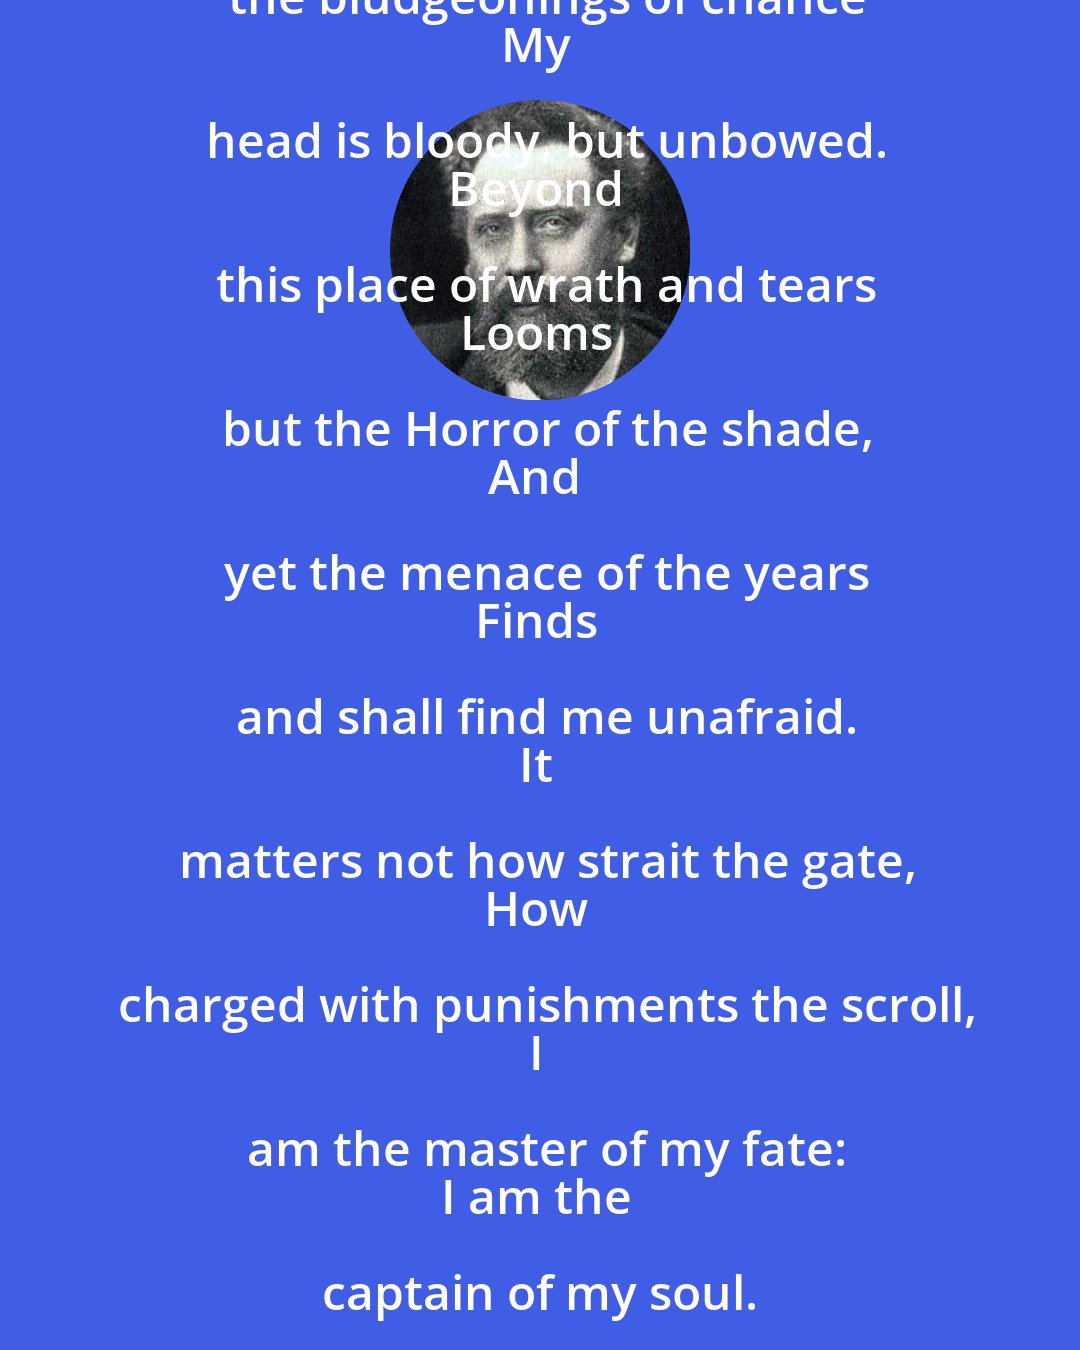 William Ernest Henley: Out of the night that covers me,
Black is the pit from pole to pole,
I thank whatever gods may be
For my unconquerable soul.
In the fell clutch of circumstance
I have not winced nor cried aloud.
Under the bludgeonings of chance
My head is bloody, but unbowed.
Beyond this place of wrath and tears
Looms but the Horror of the shade,
And yet the menace of the years
Finds and shall find me unafraid.
It matters not how strait the gate,
How charged with punishments the scroll,
I am the master of my fate:
I am the captain of my soul.